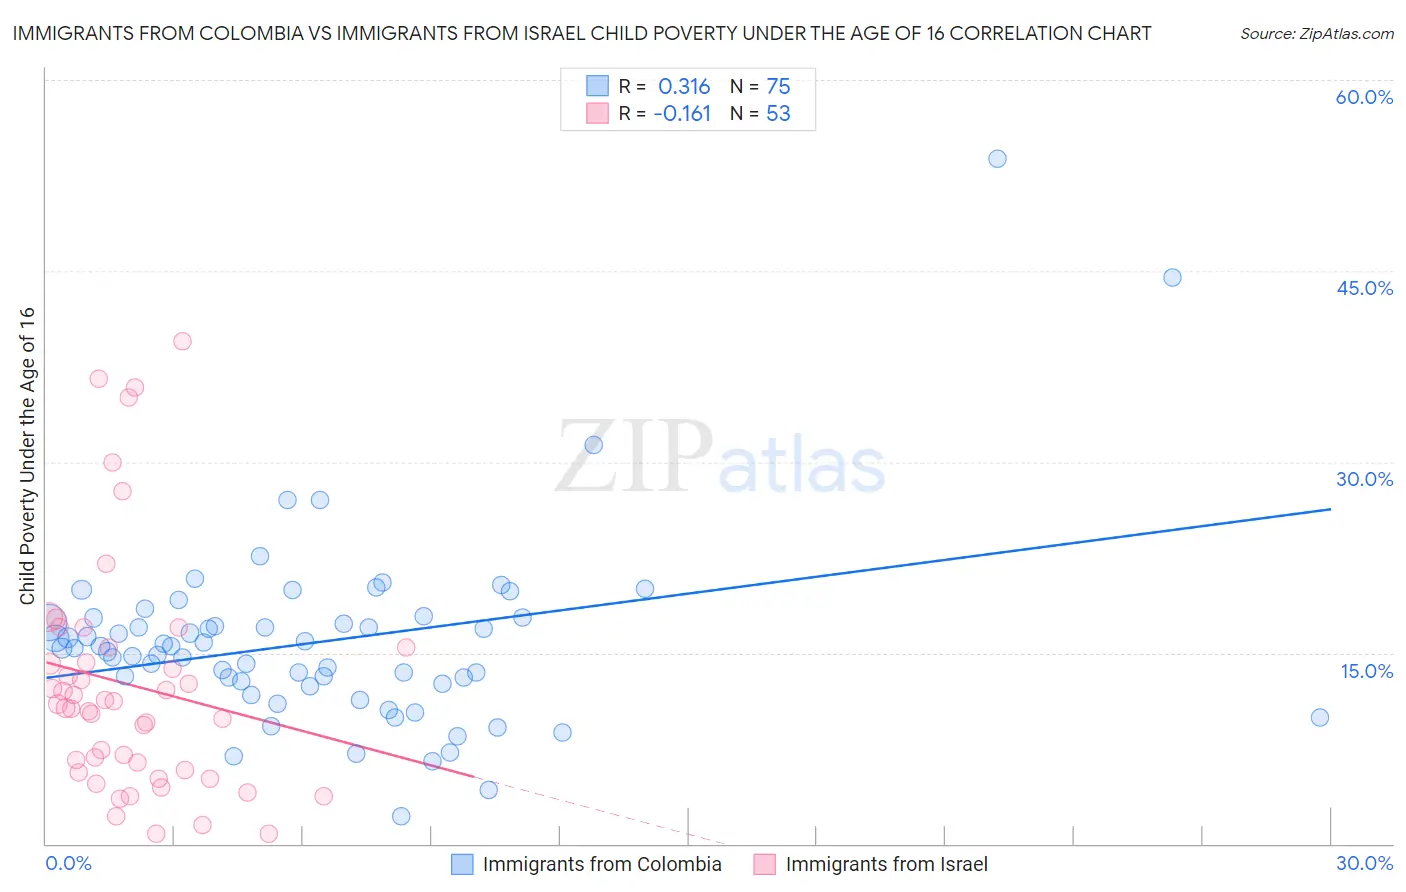 Immigrants from Colombia vs Immigrants from Israel Child Poverty Under the Age of 16